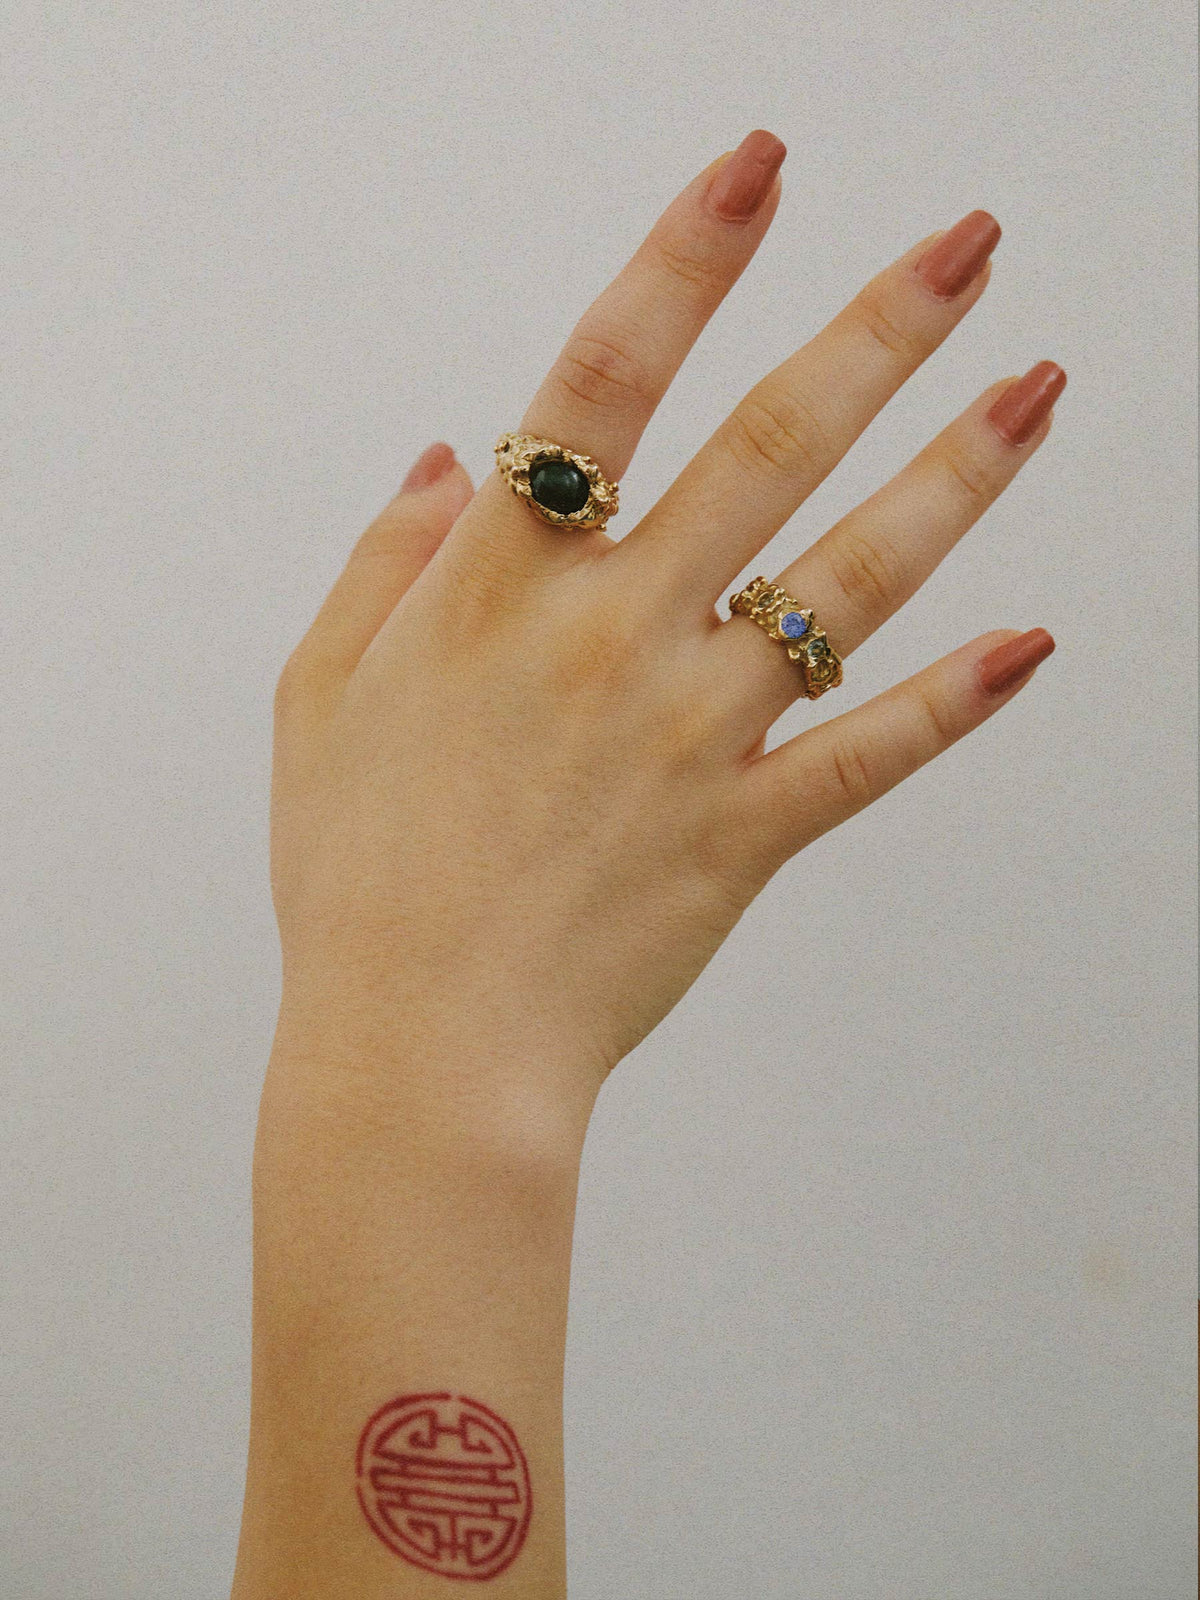 FARIS ROCA EYE Ring in gold-plated bronze with jade worn on model. Styled with ROCA GEM Band in gold-plated bronze with lab-created blue and green sapphire